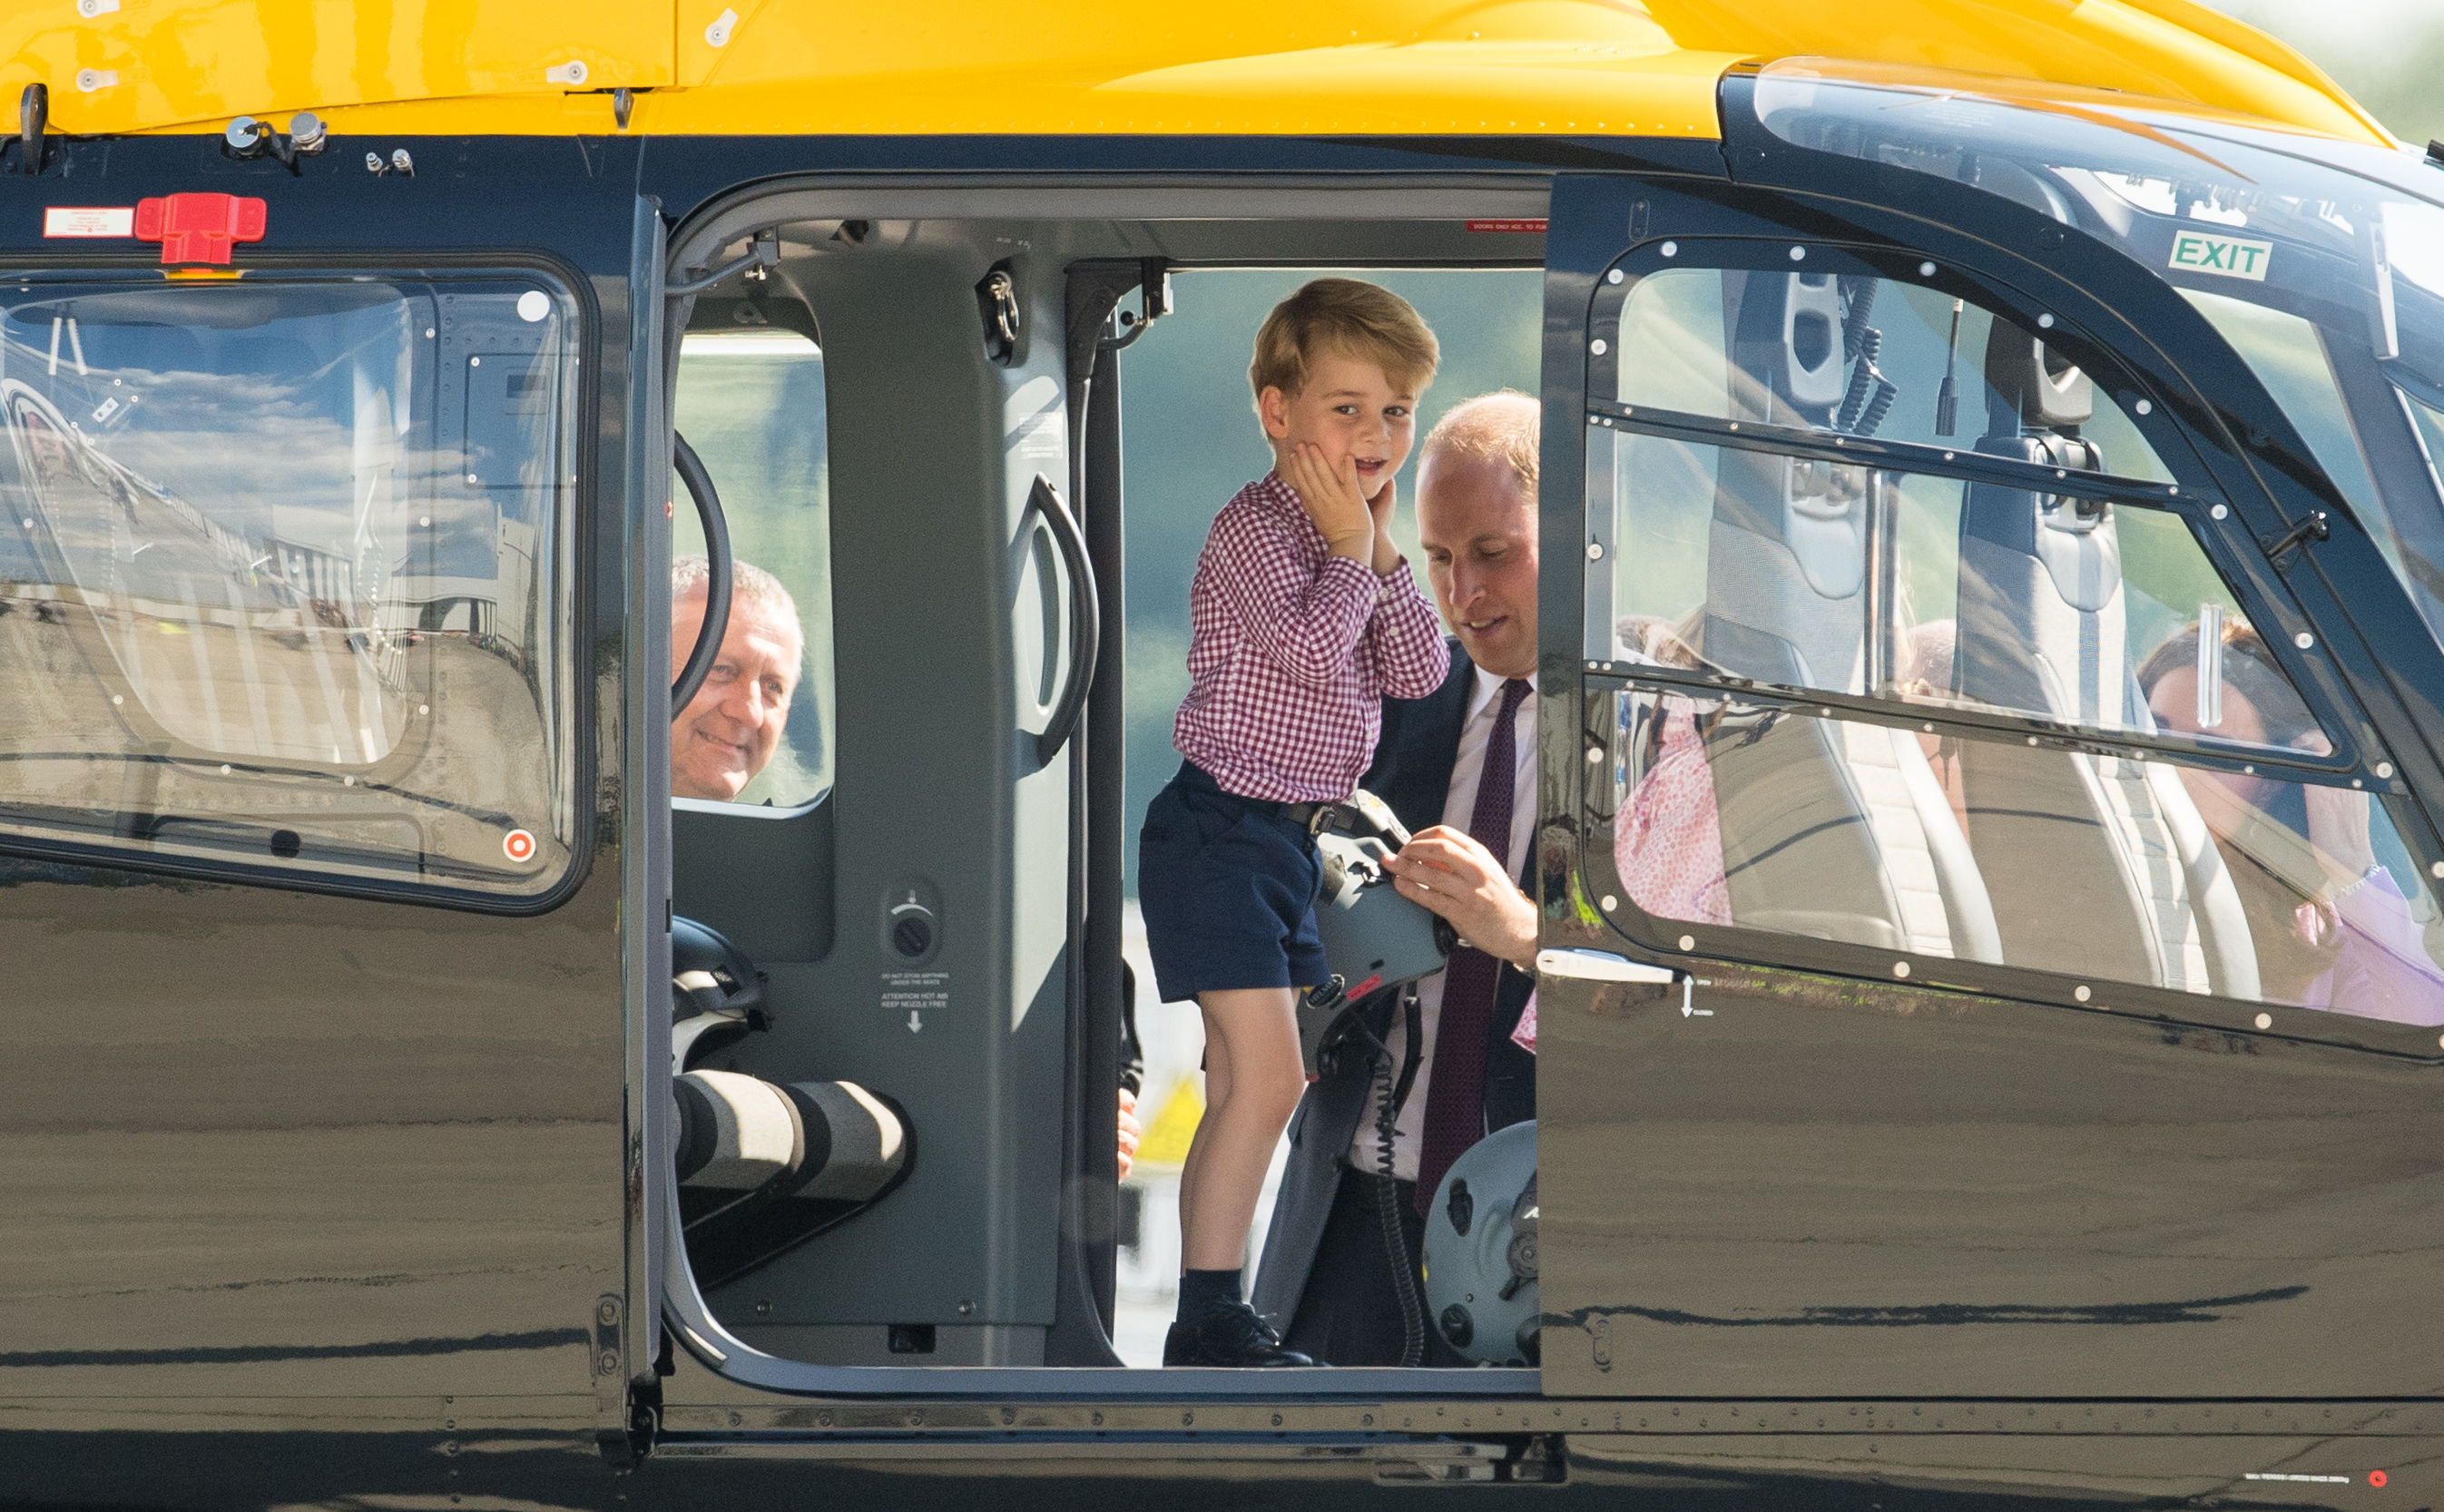 Prince George stands in a rescue helicopter as his father the Duke of Cambridge adjusts a helmet for him to wear, during a visit to Airbus in Hamburg, Germany with the Duchess of Cambridge and sister Princess Charlotte 